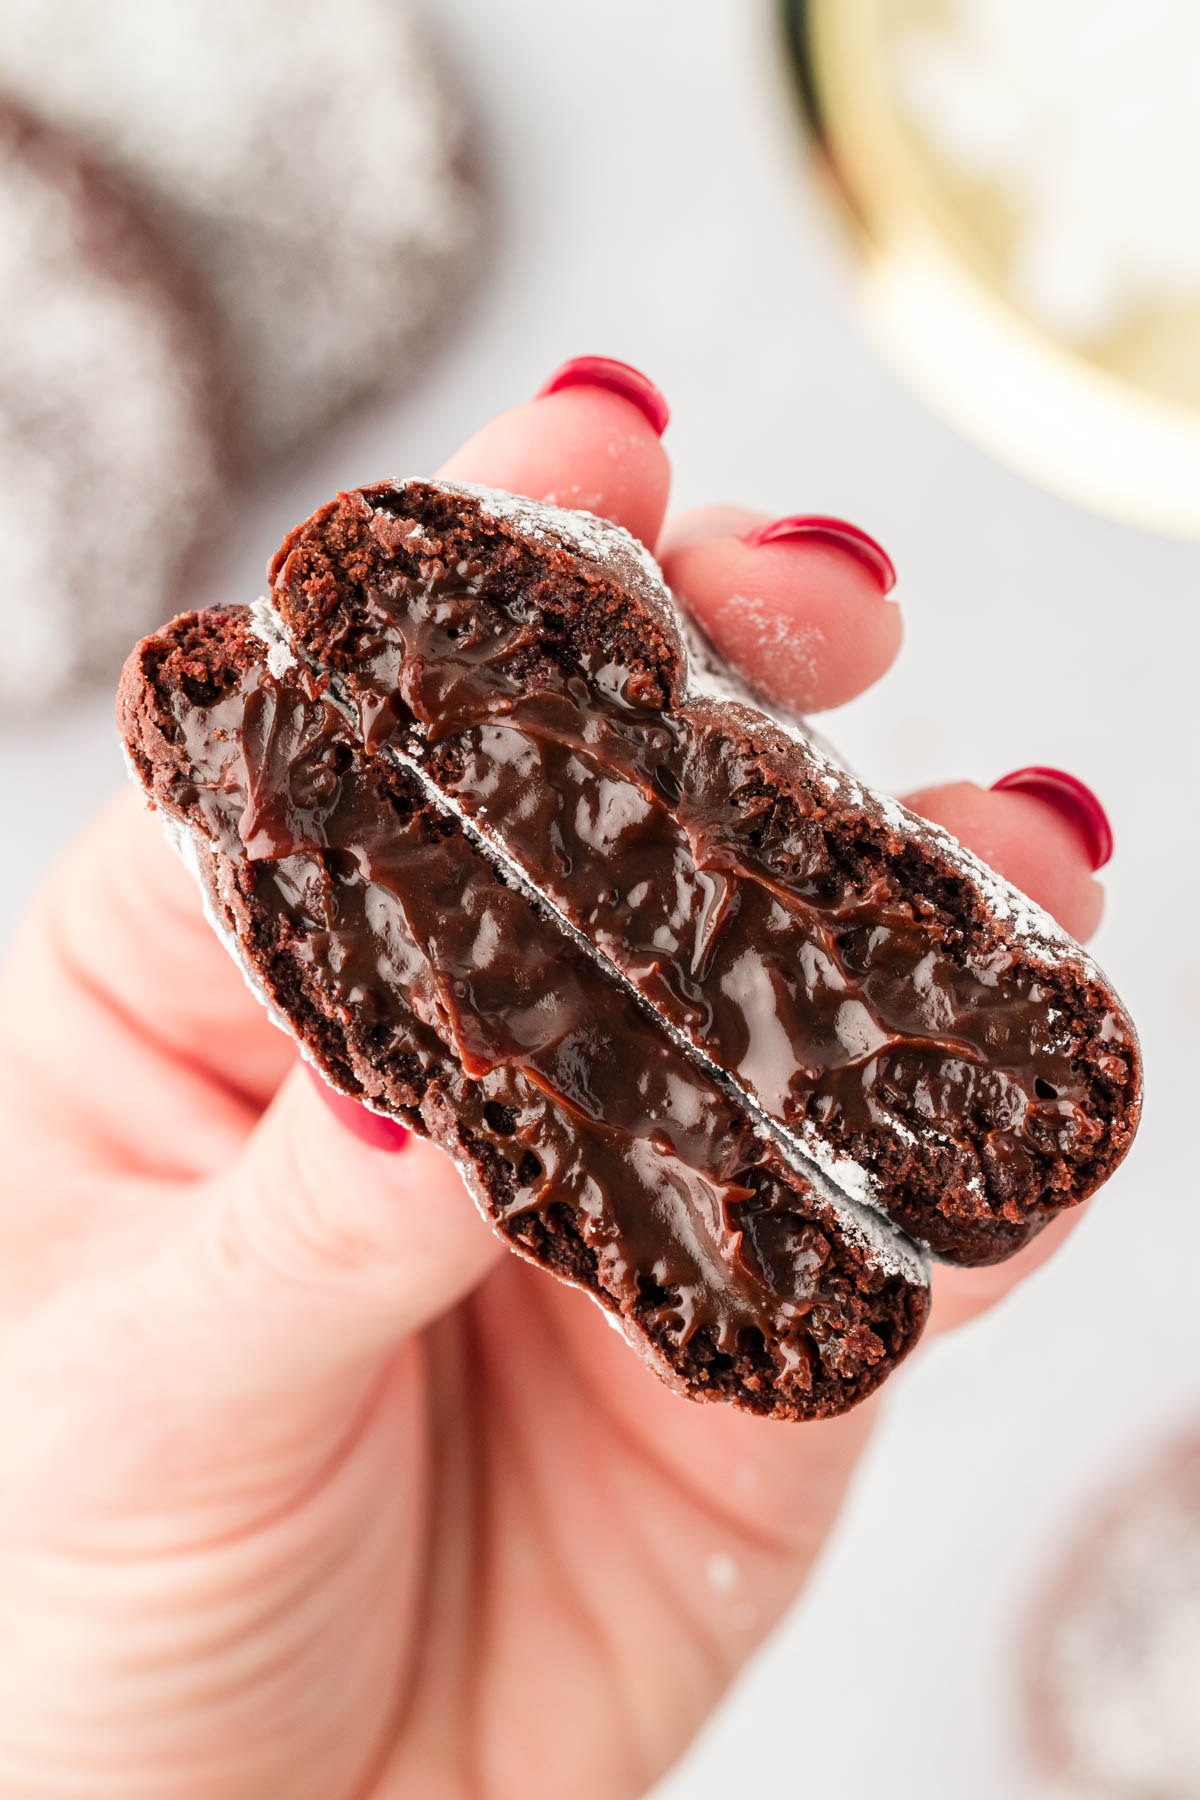 A woman's hand holding a lava cake cookie that's been broken in half to the camera.